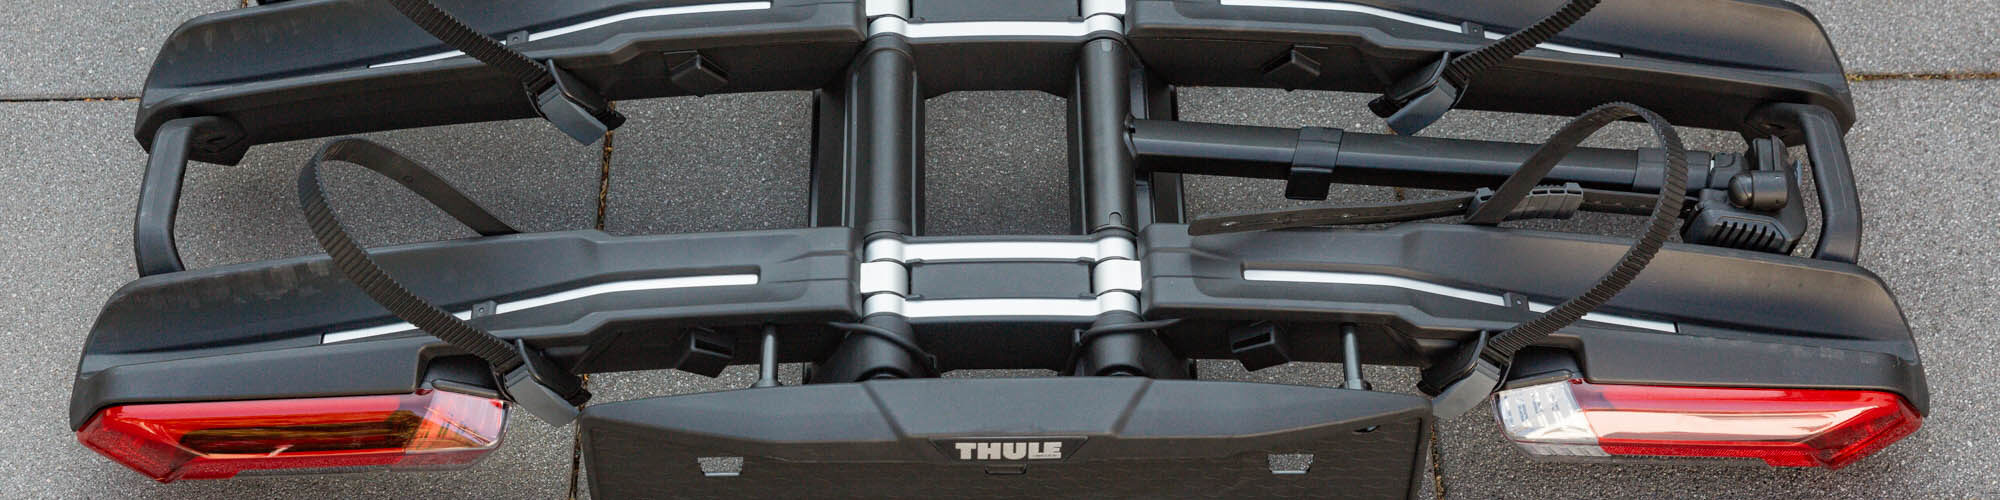 Thule EPOS Towball Carrier review: best bike rack I've used